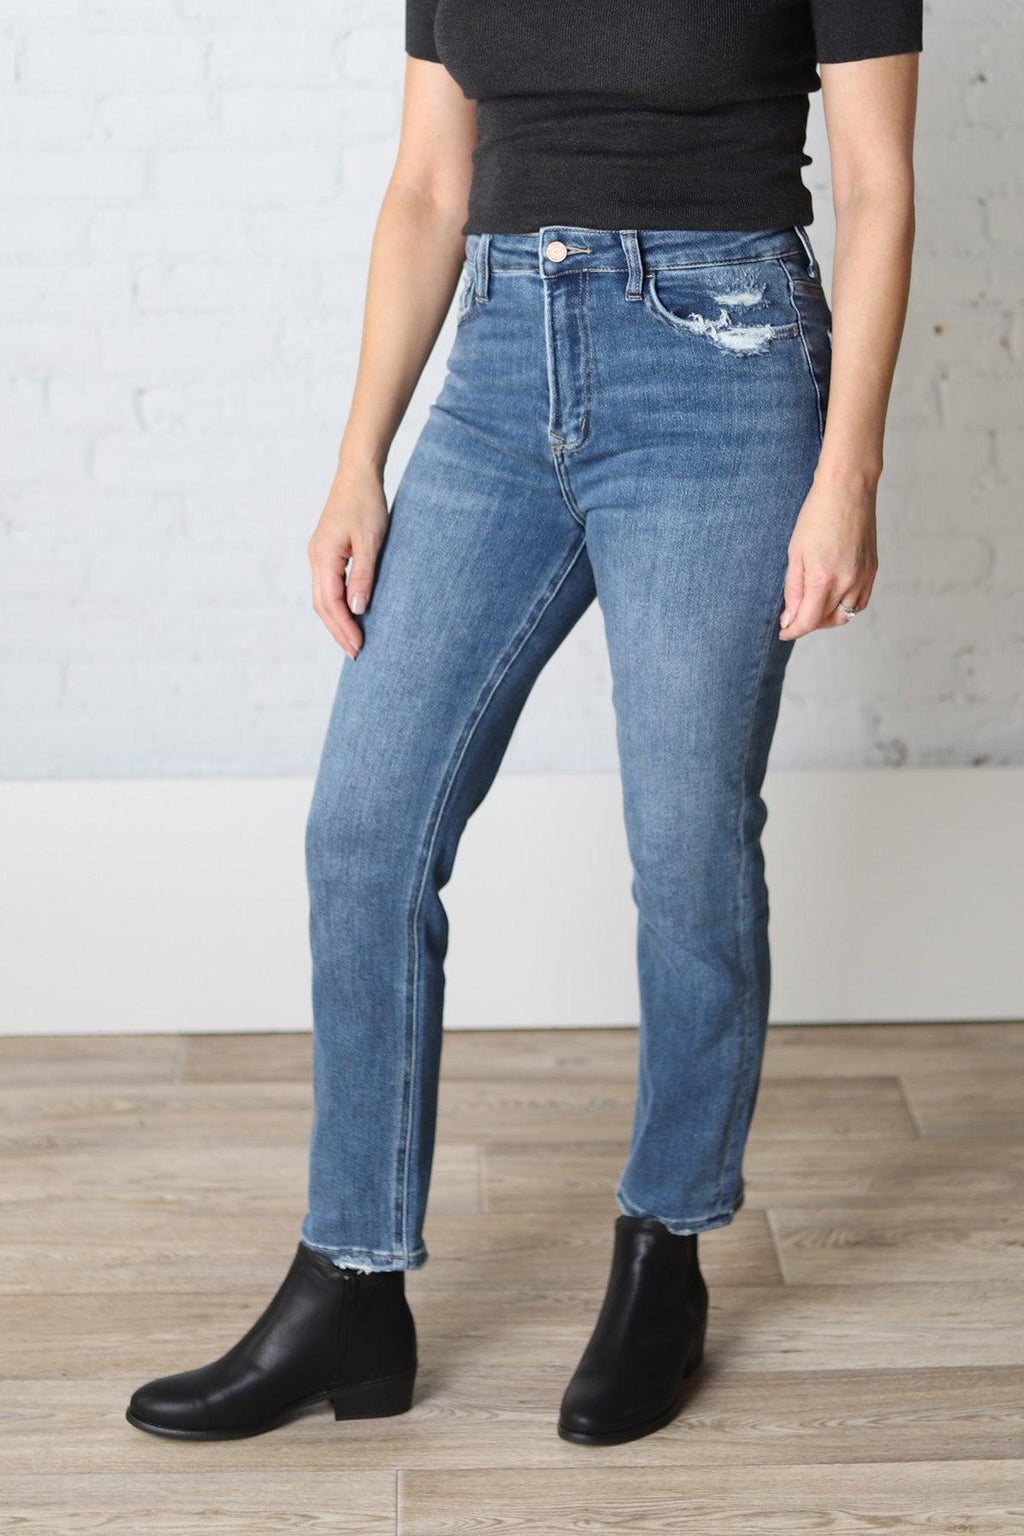 Jeans – Gallery Boutique 512